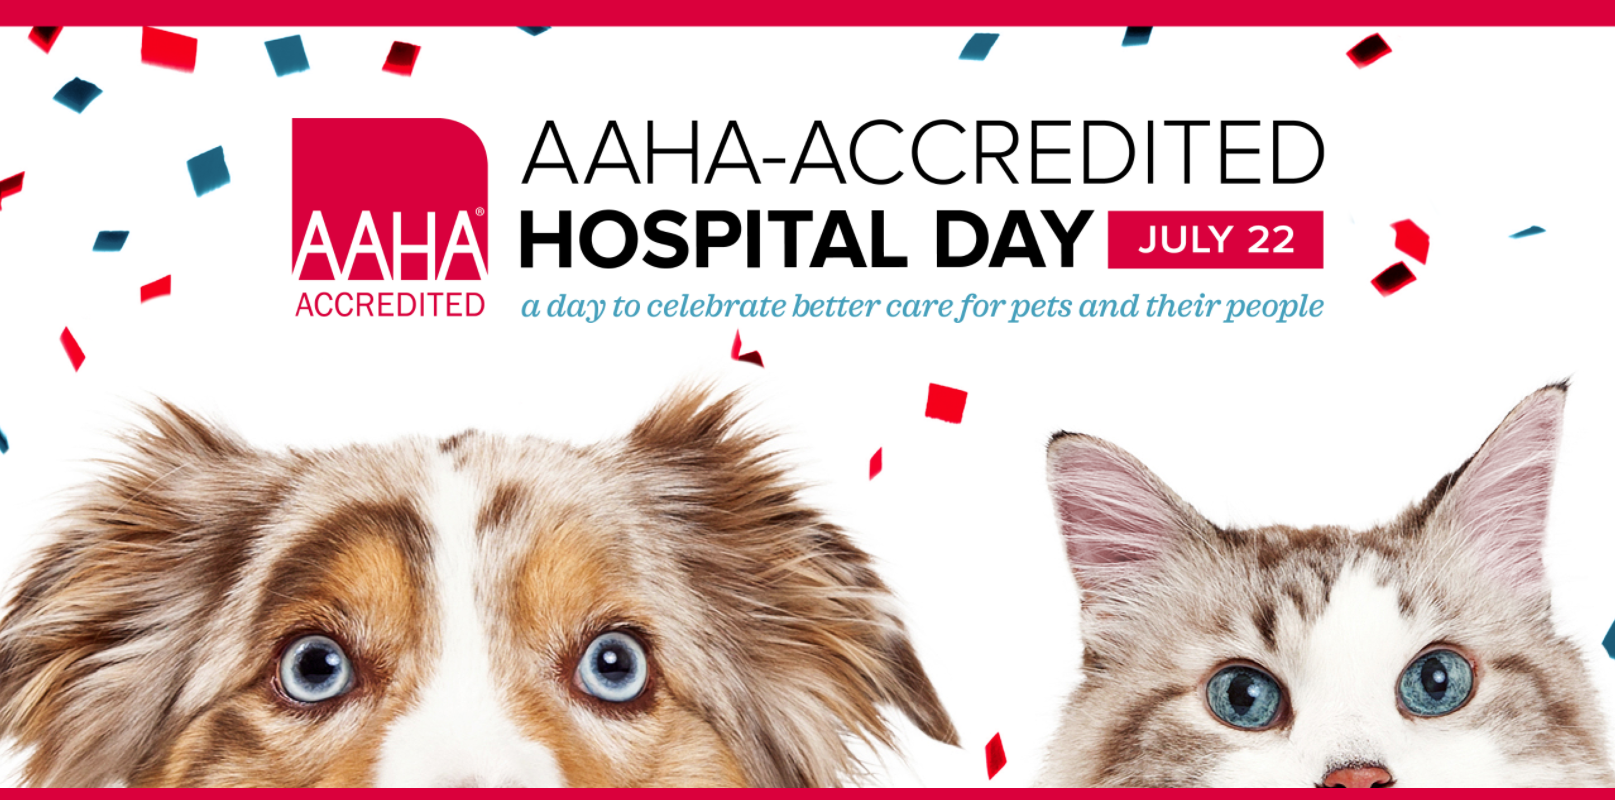 AAHA-Accredited Hospital Day: A Day to Celebrate Better Care for Pets and Their People